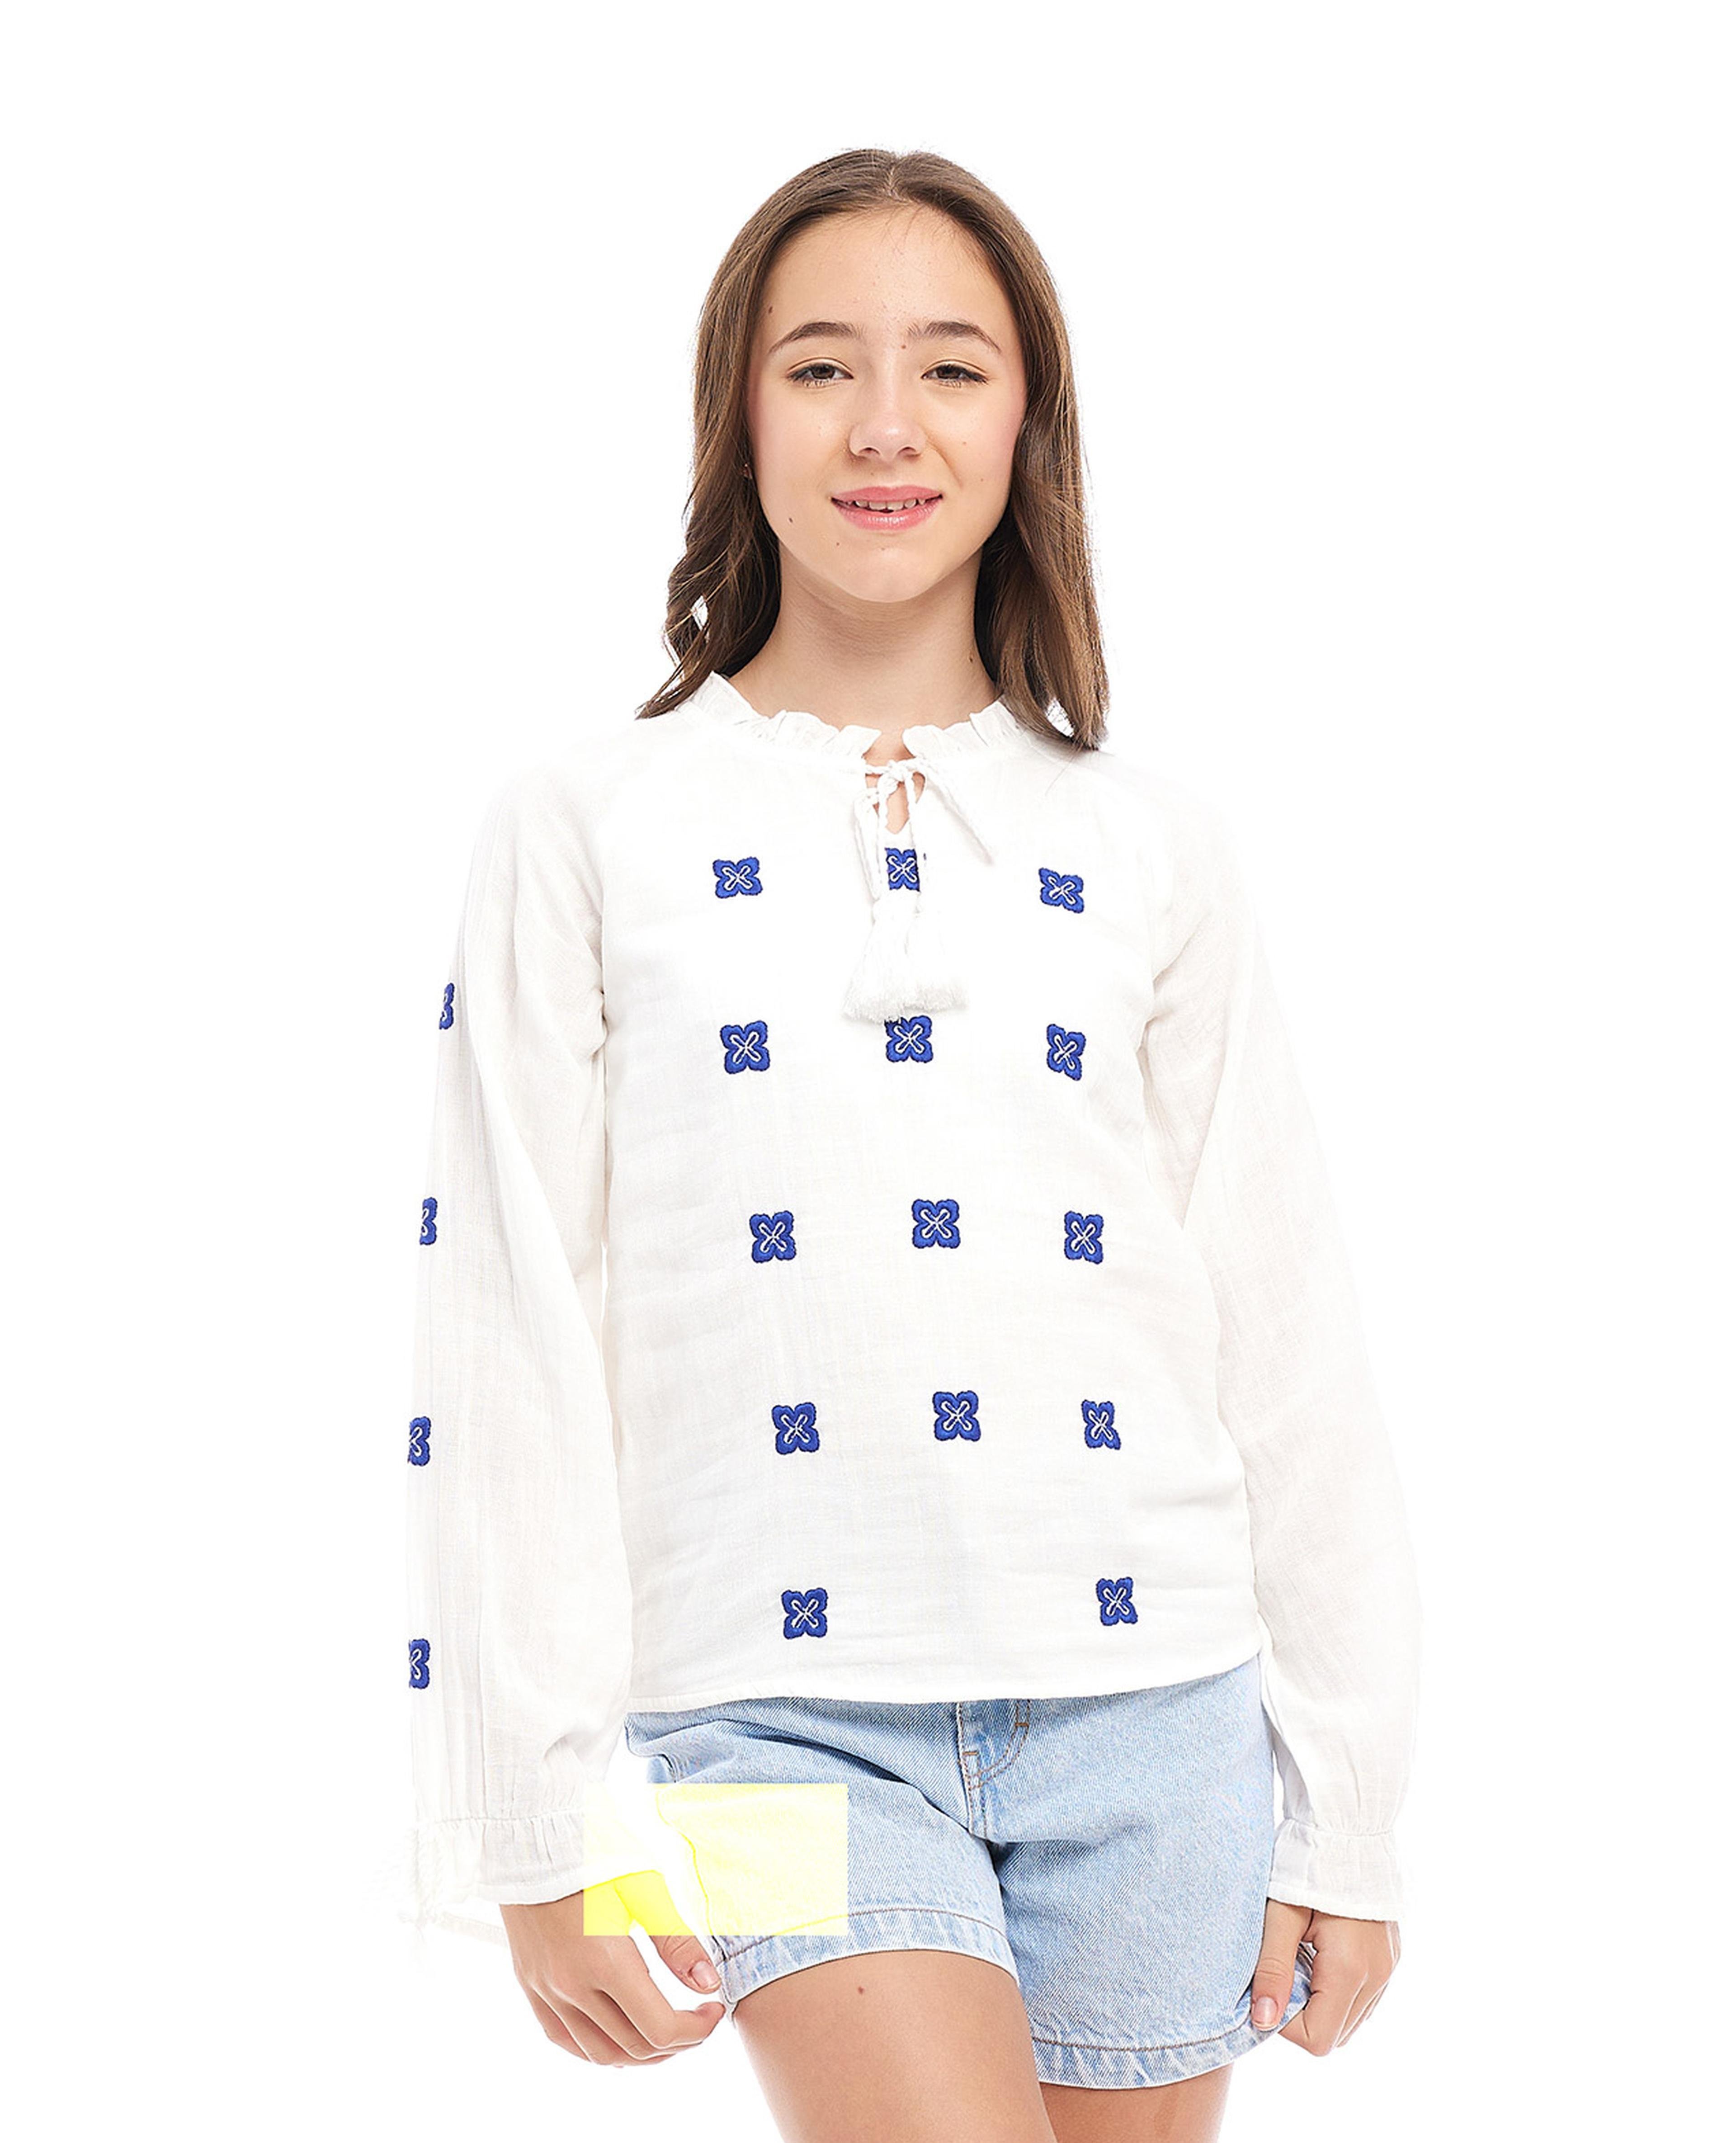 Embroidered Top with Tie-Up Neck and Long Sleeves